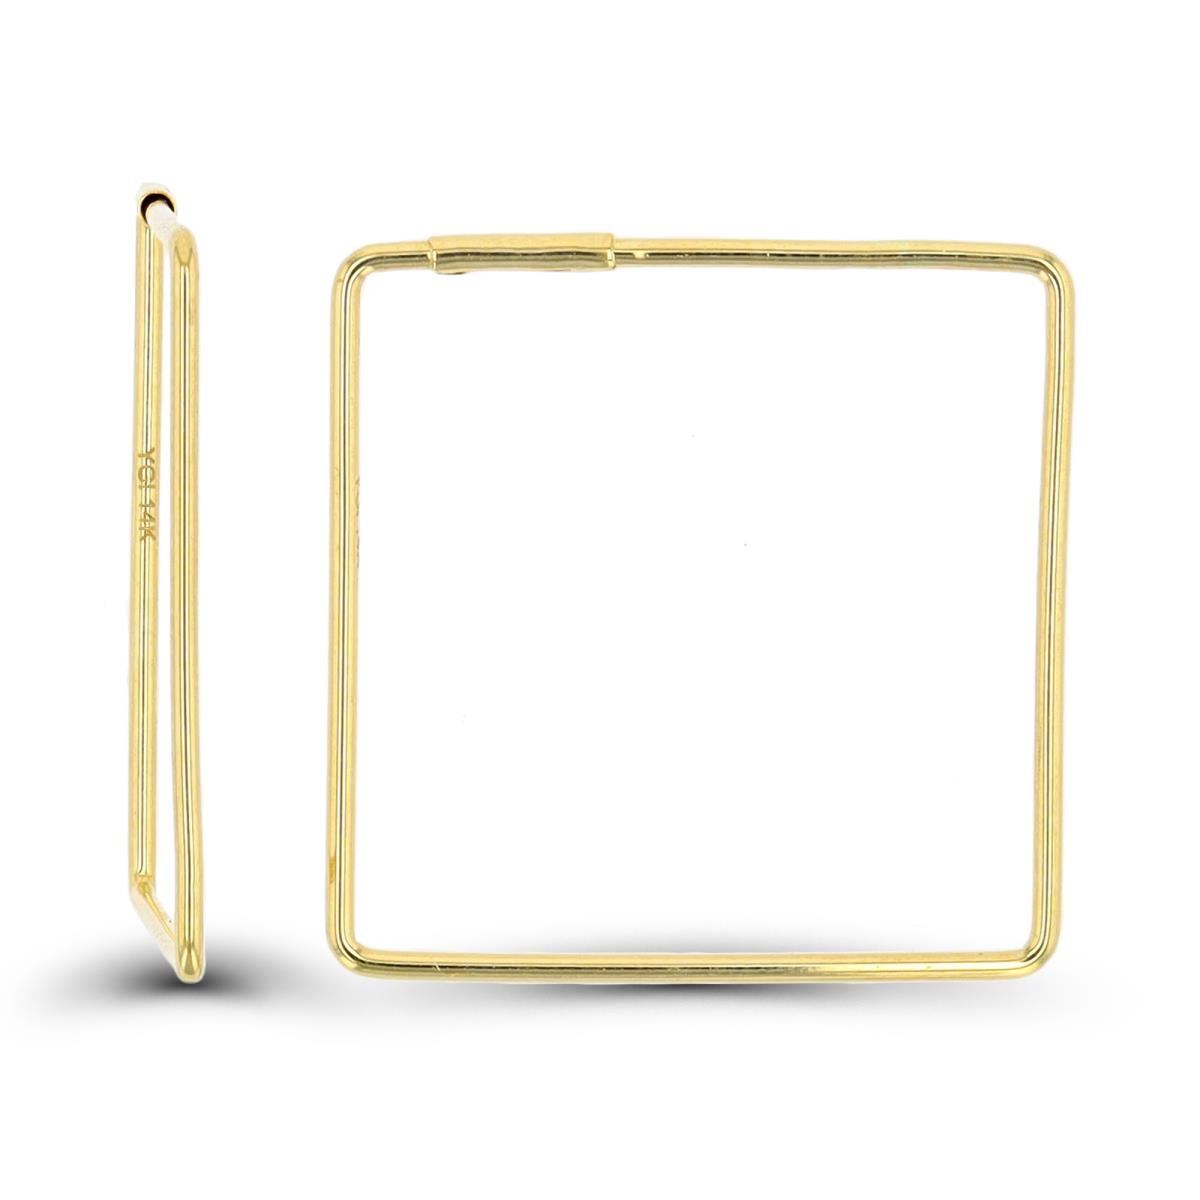 10K Yellow Gold Polished Square Hoop Earring